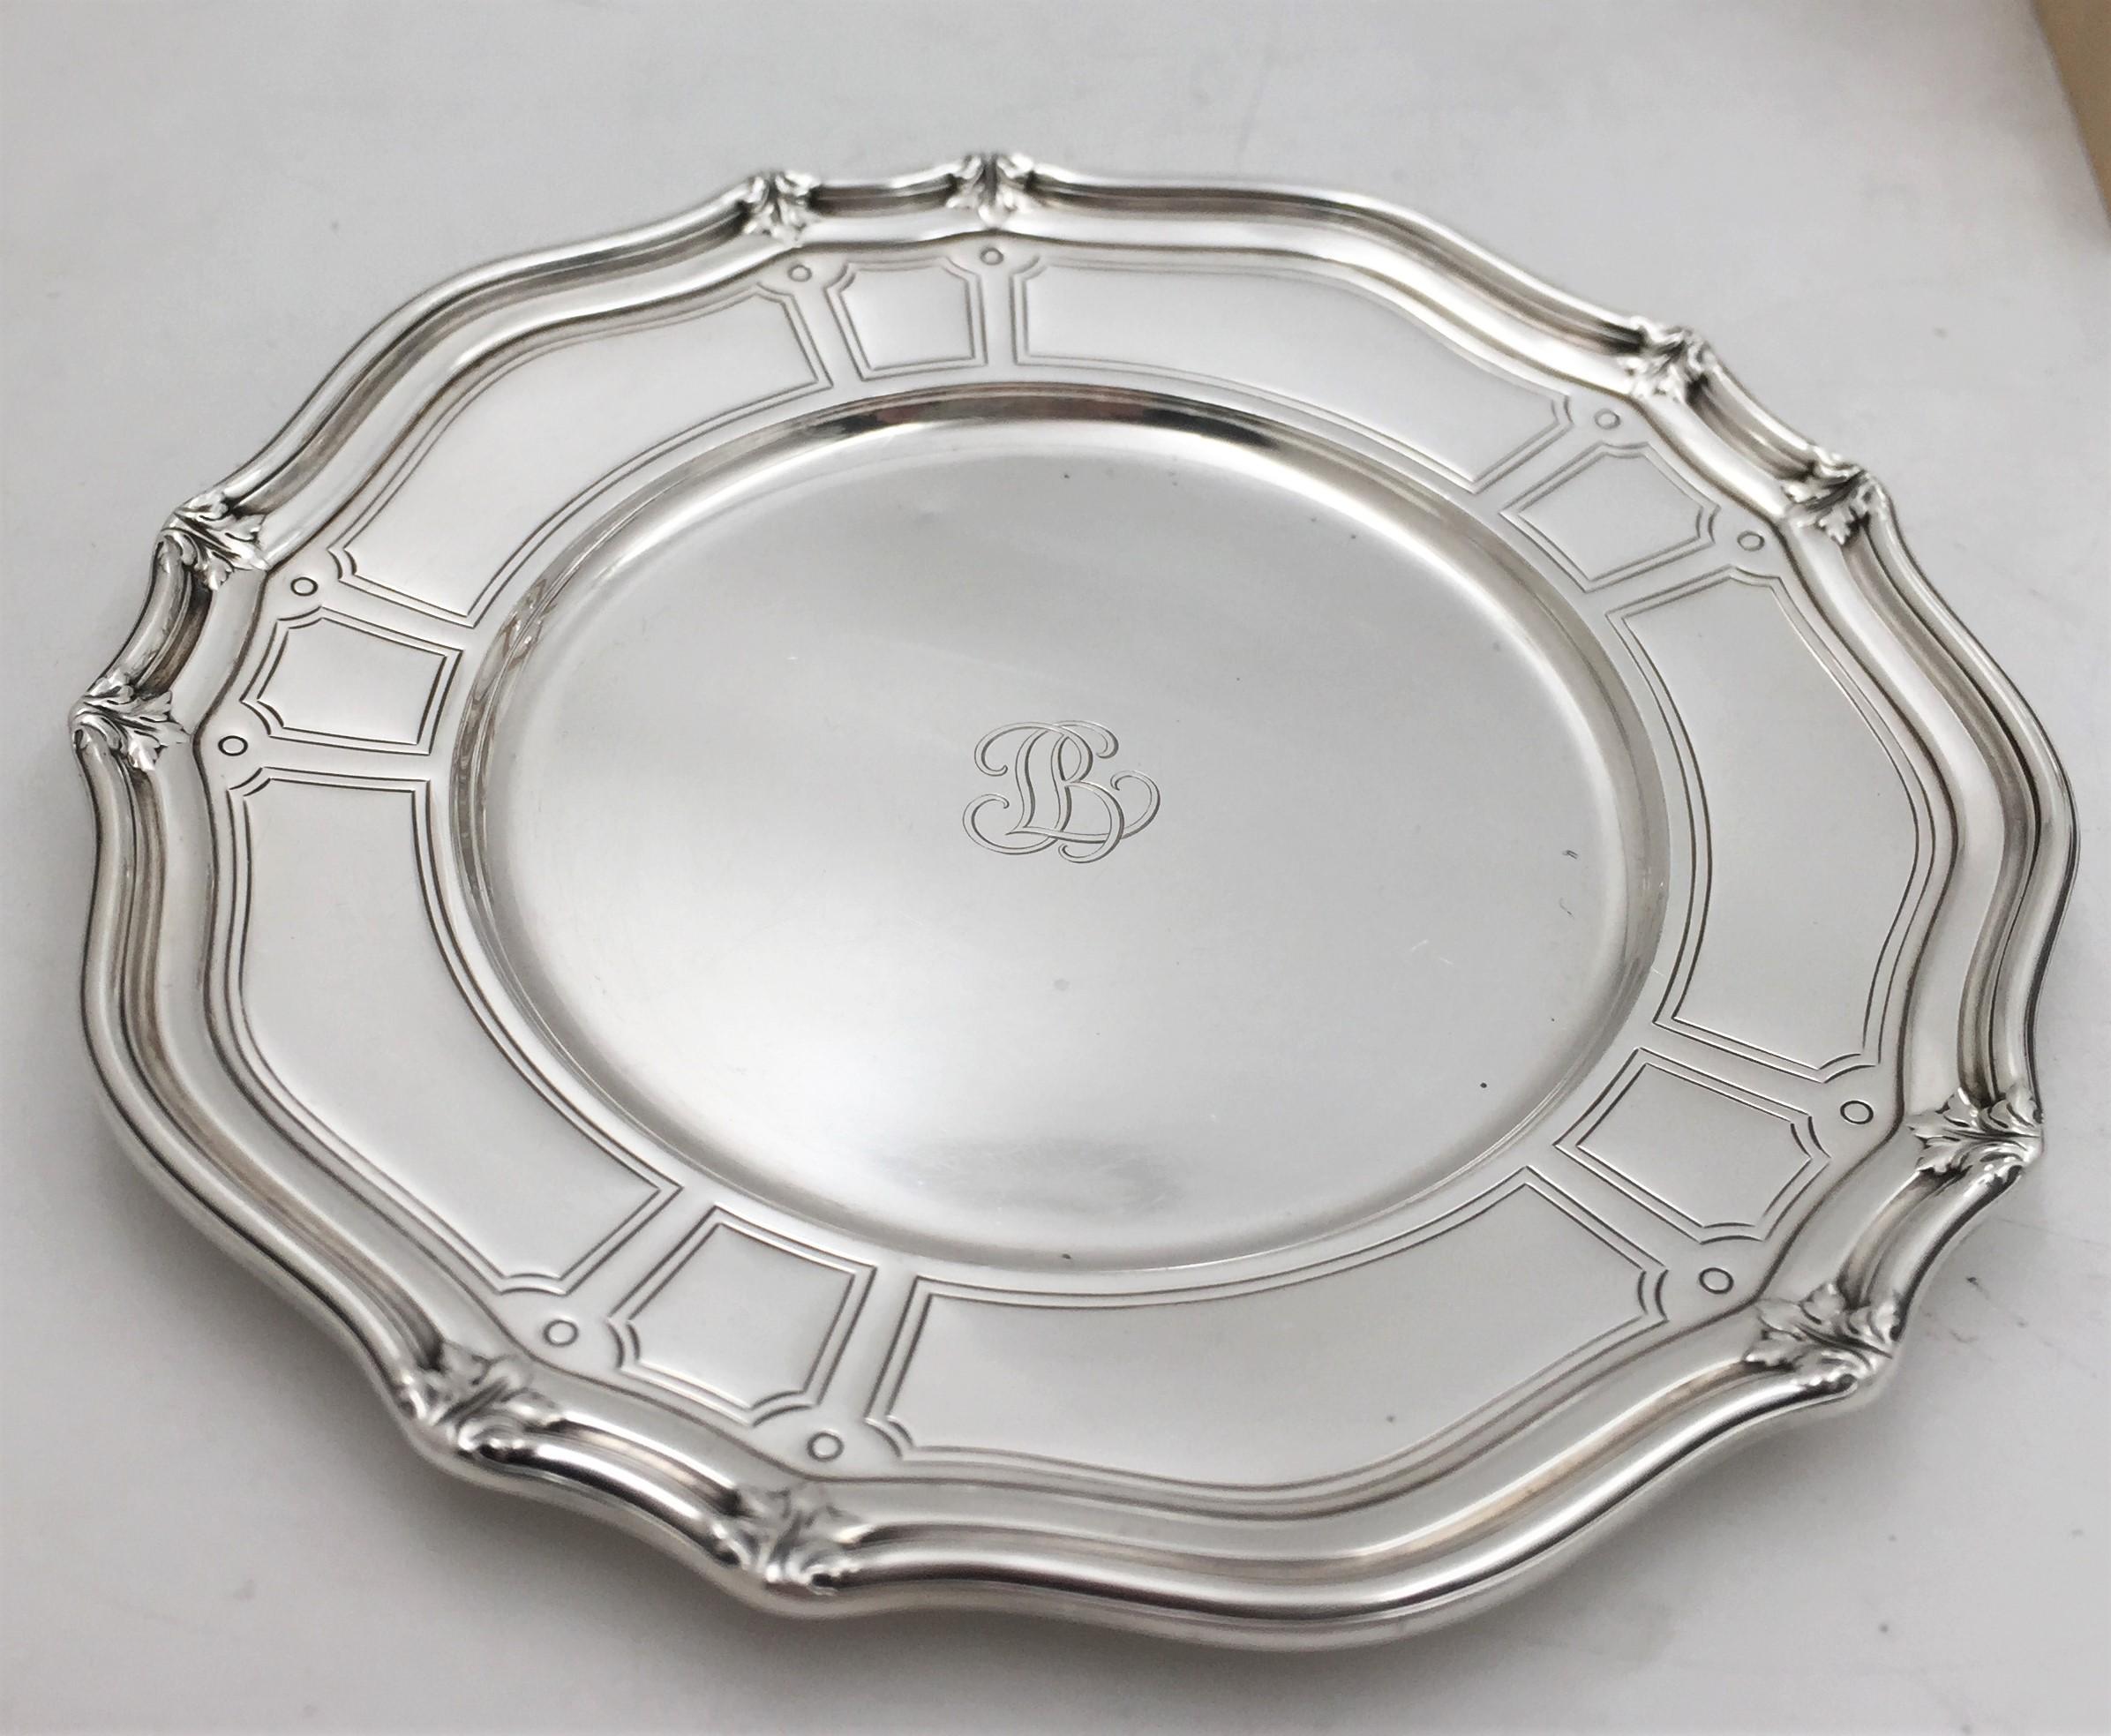 Tiffany & Co. sterling silver set of 6 dessert Plates/ dishes in St. Dunstan pattern number 17459 from 1909. Each measures 7 1/2'' in diameter by 5/8'' in height and bears hallmarks and a monogram as shown. Total weight is 54.5 troy ounces. 

The